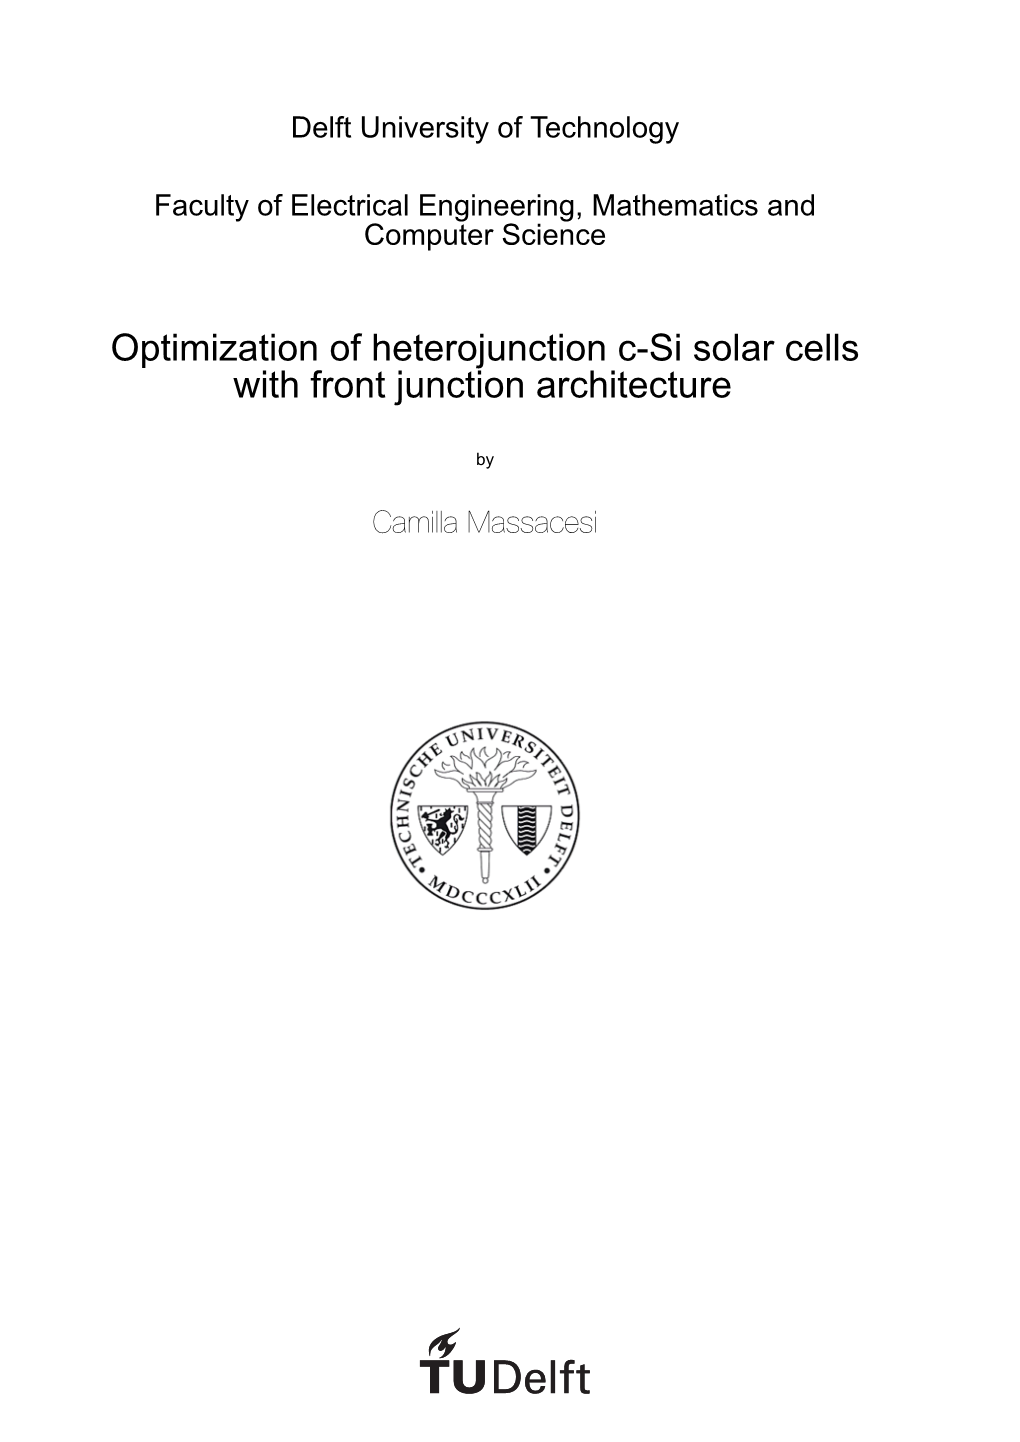 Msc Thesis Optimization of Heterojunction C-Si Solar Cells with Front Junction Architecture